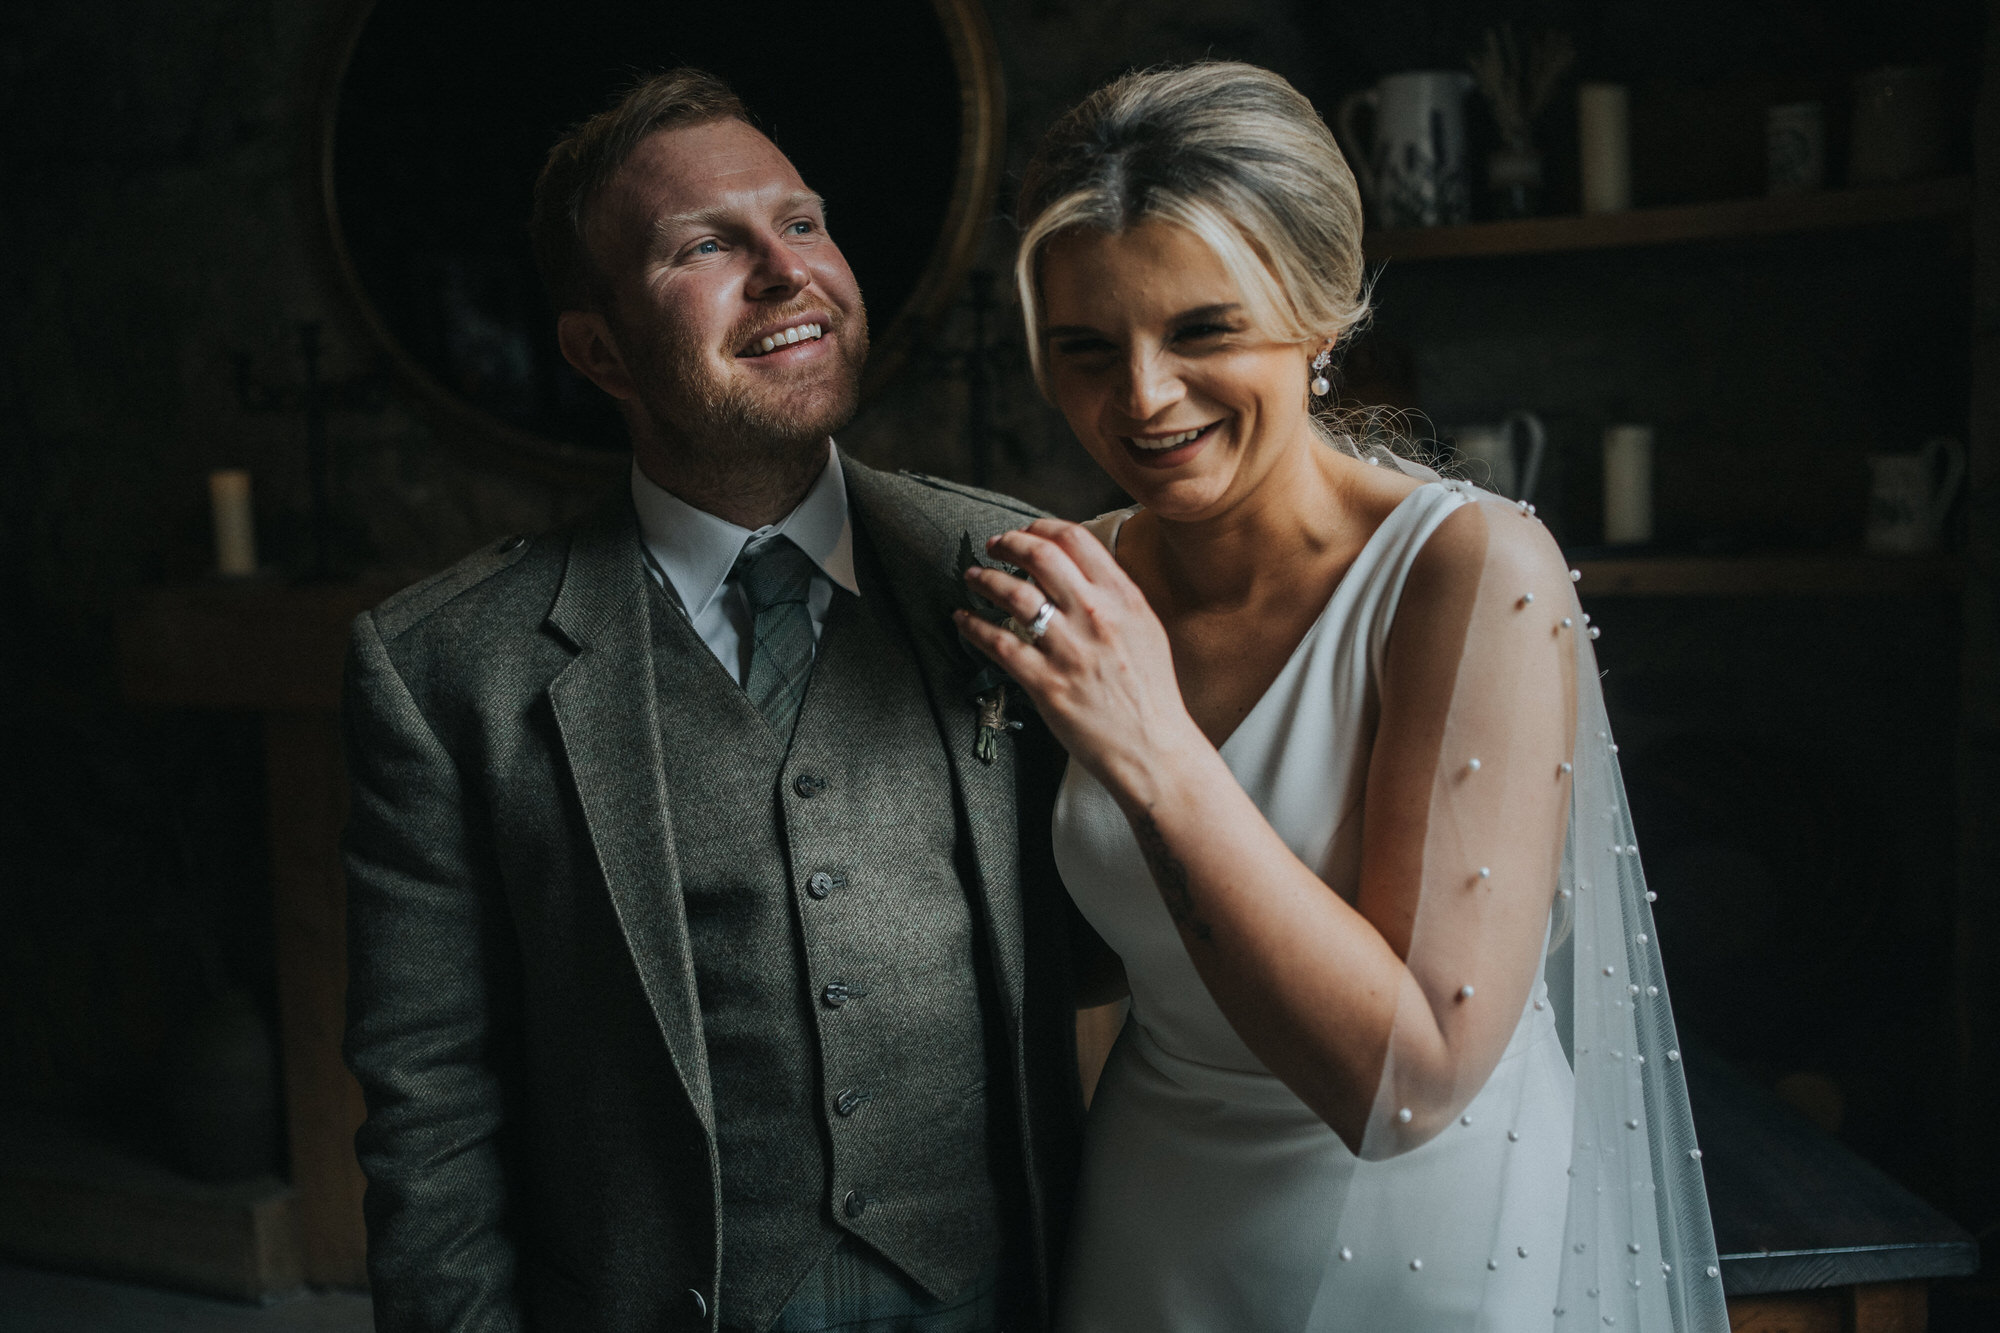 The Bothy, Glasgow - A bride and groom laugh on their wedding day